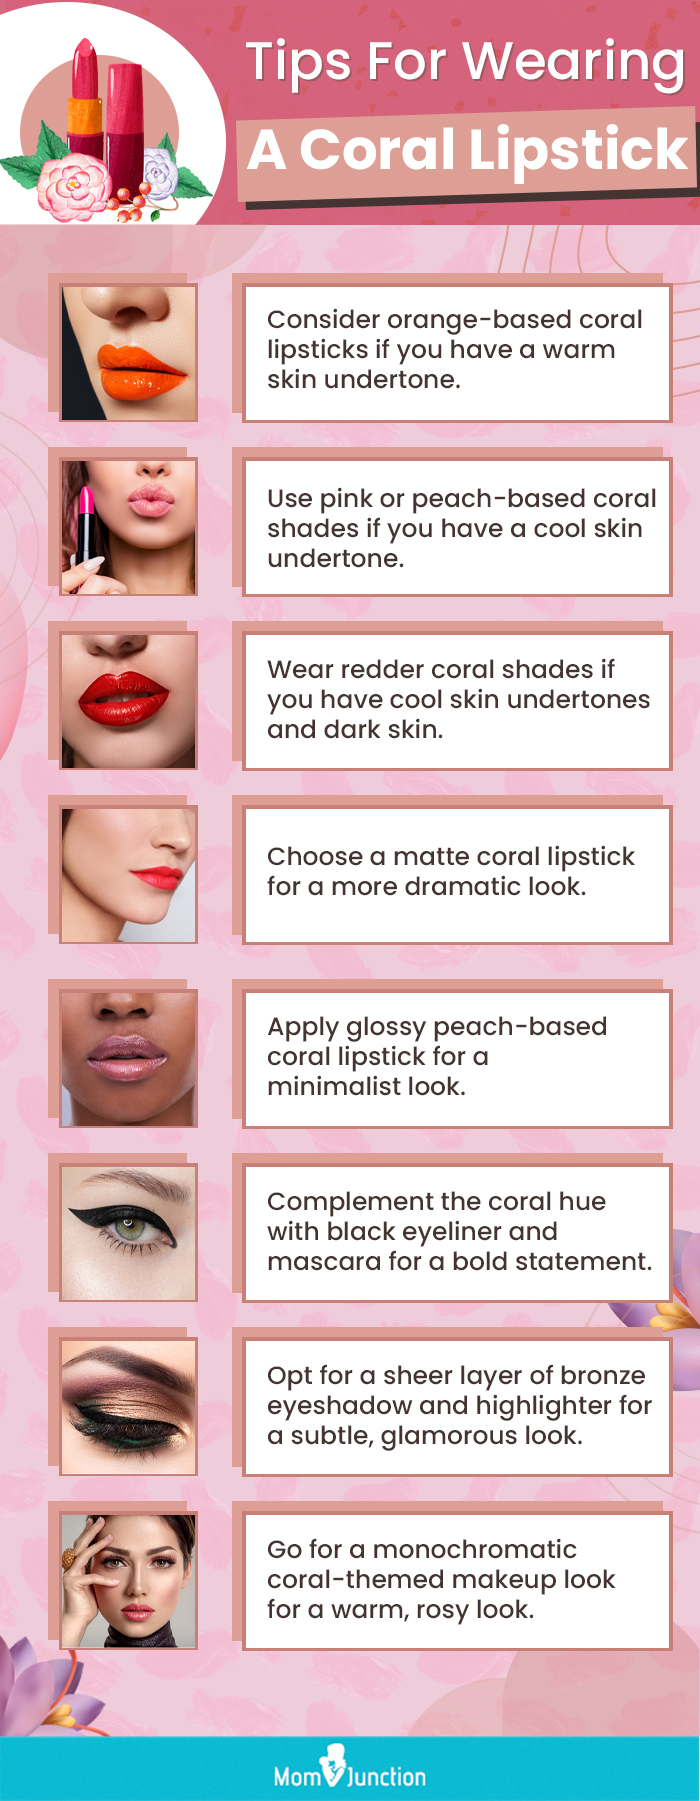 Tips For Wearing A Coral Lipstick (infographic)